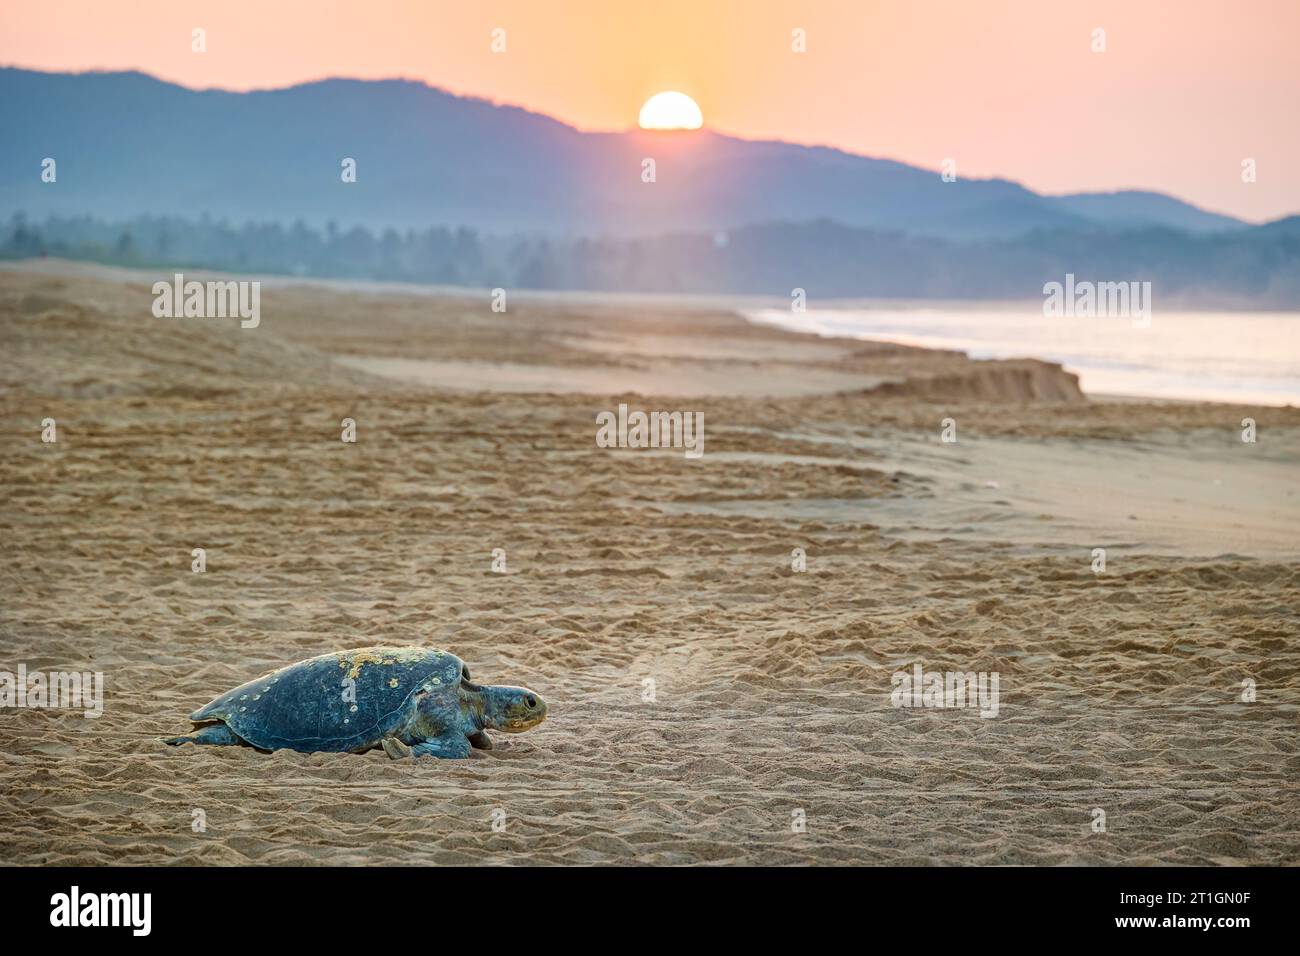 A female Green Sea Turtle (Chelonia agassizi) crawls back to the ocean after laying eggs on the beach of  Colola, Michoacan, Mexico. Stock Photo